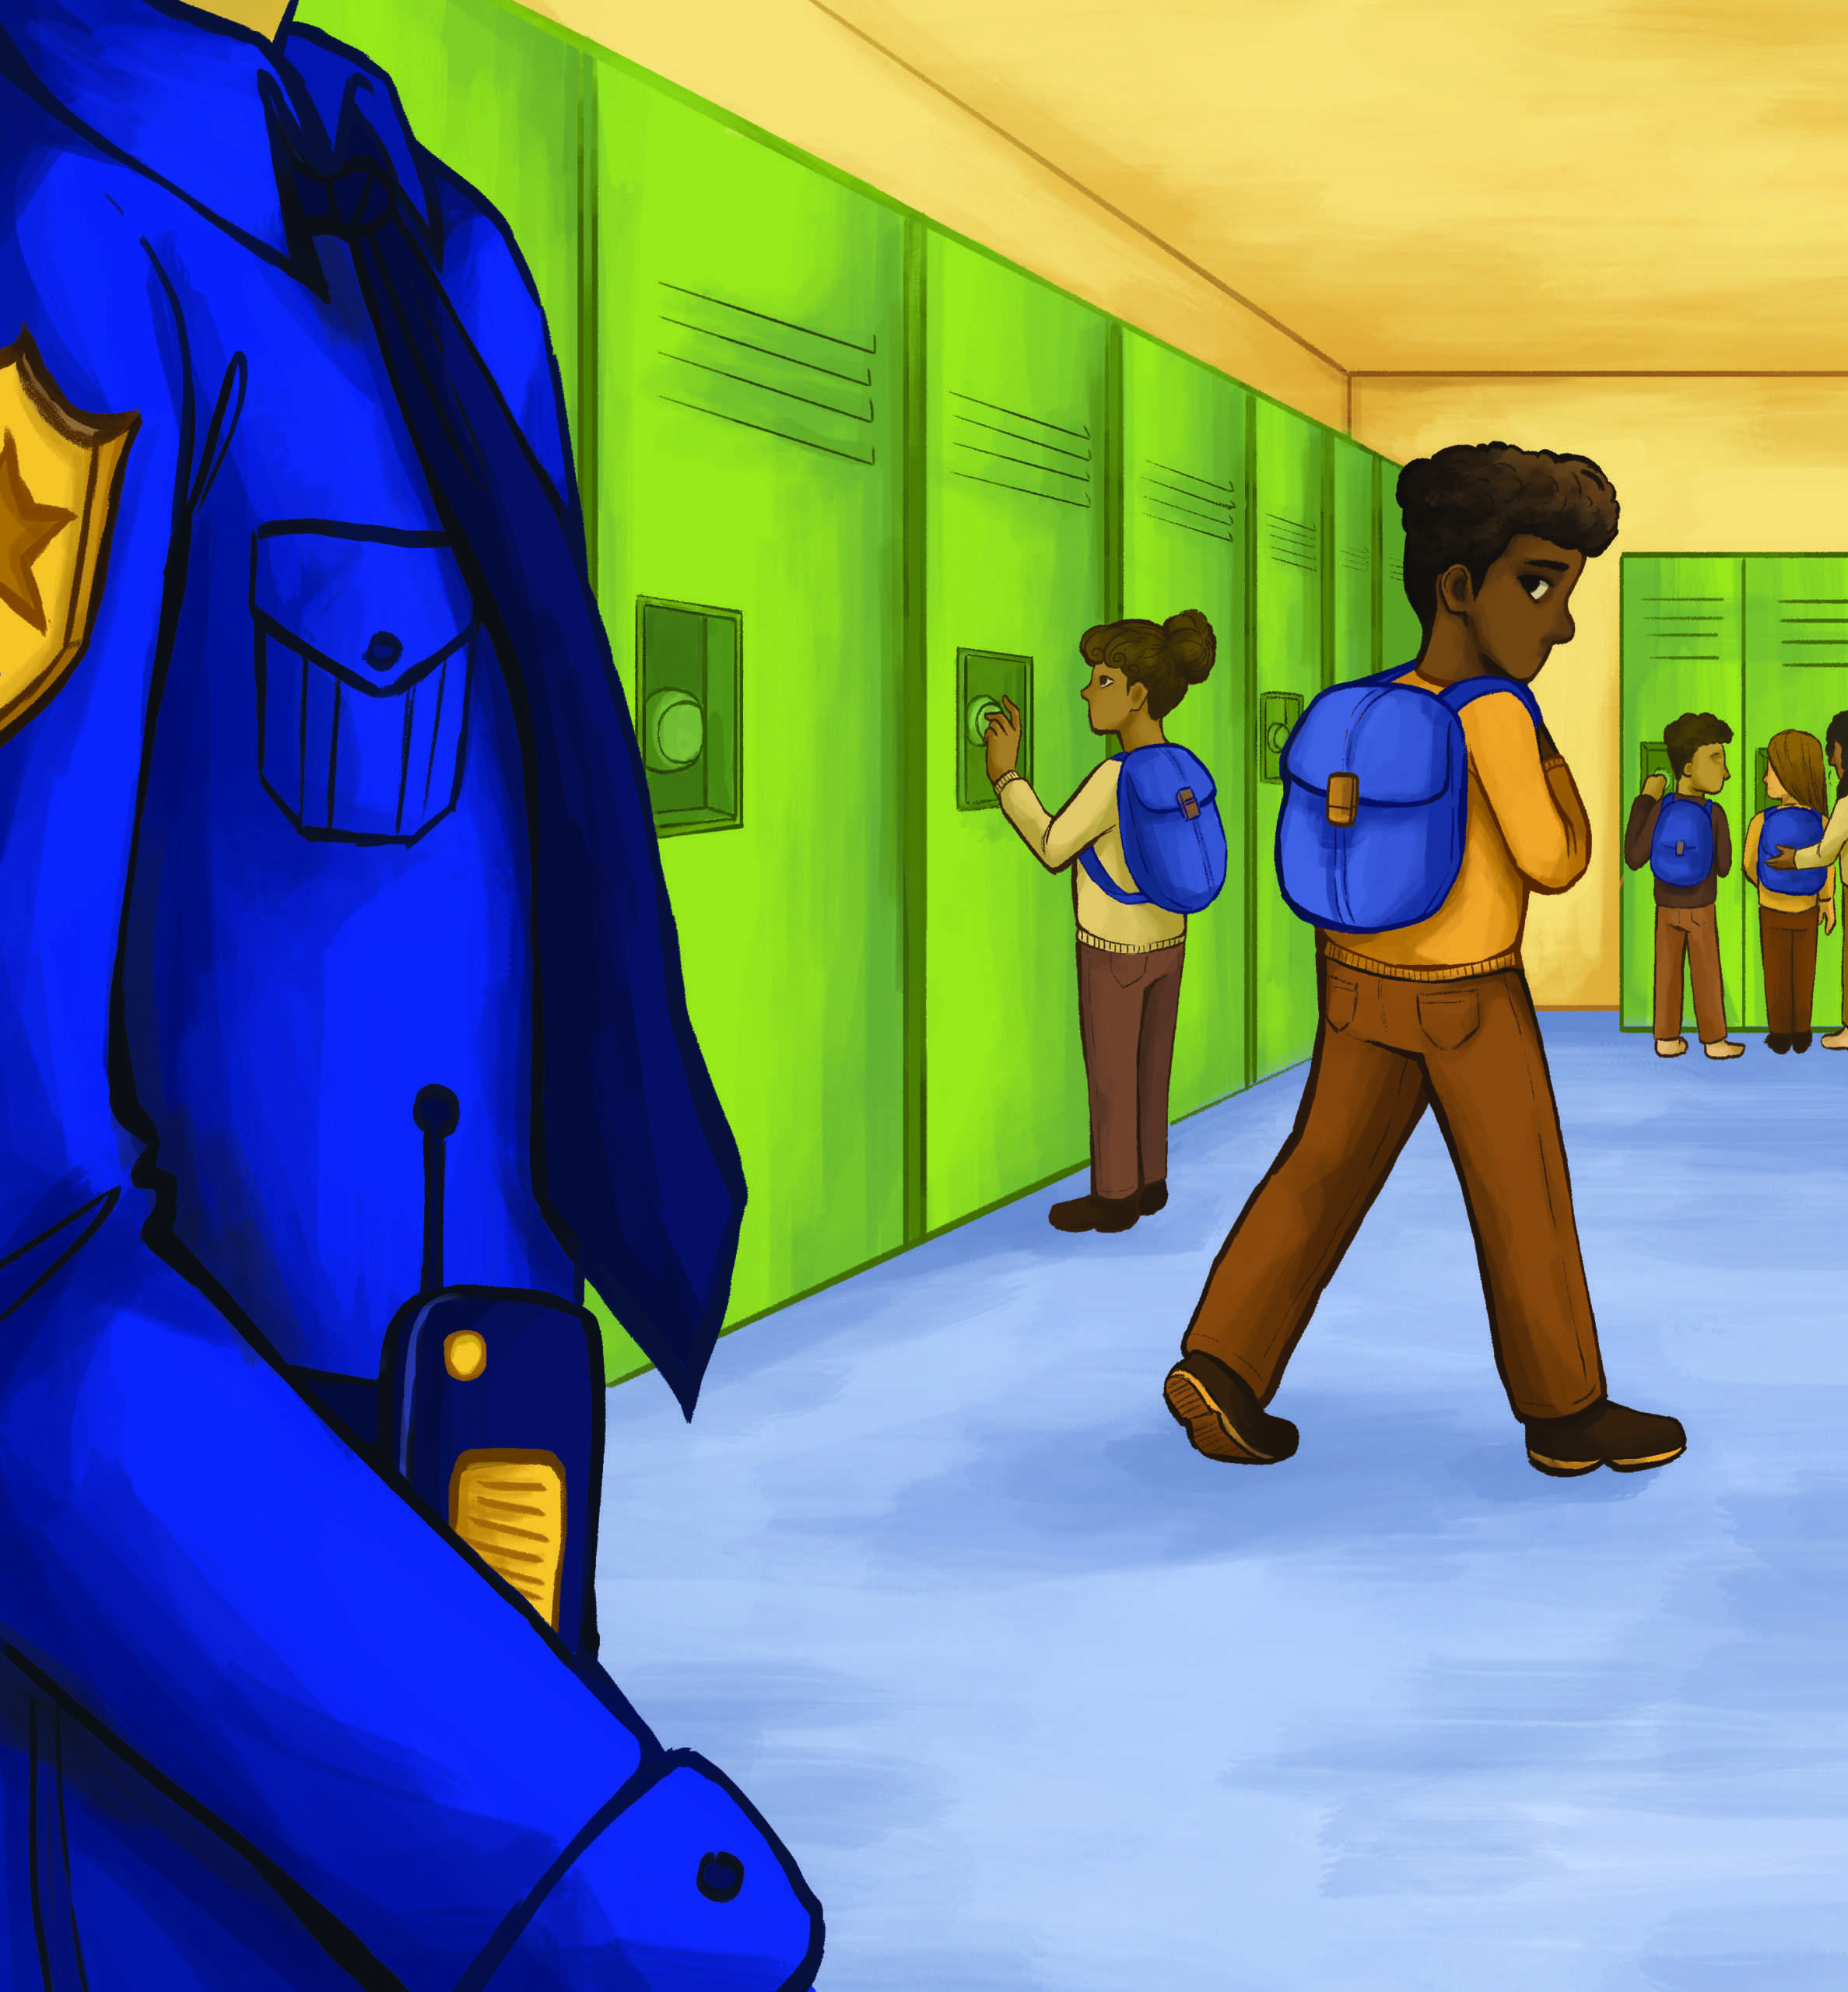 graphic illustration of an SRO officer in a school setting with a student walking away glancing backwards towards the officer